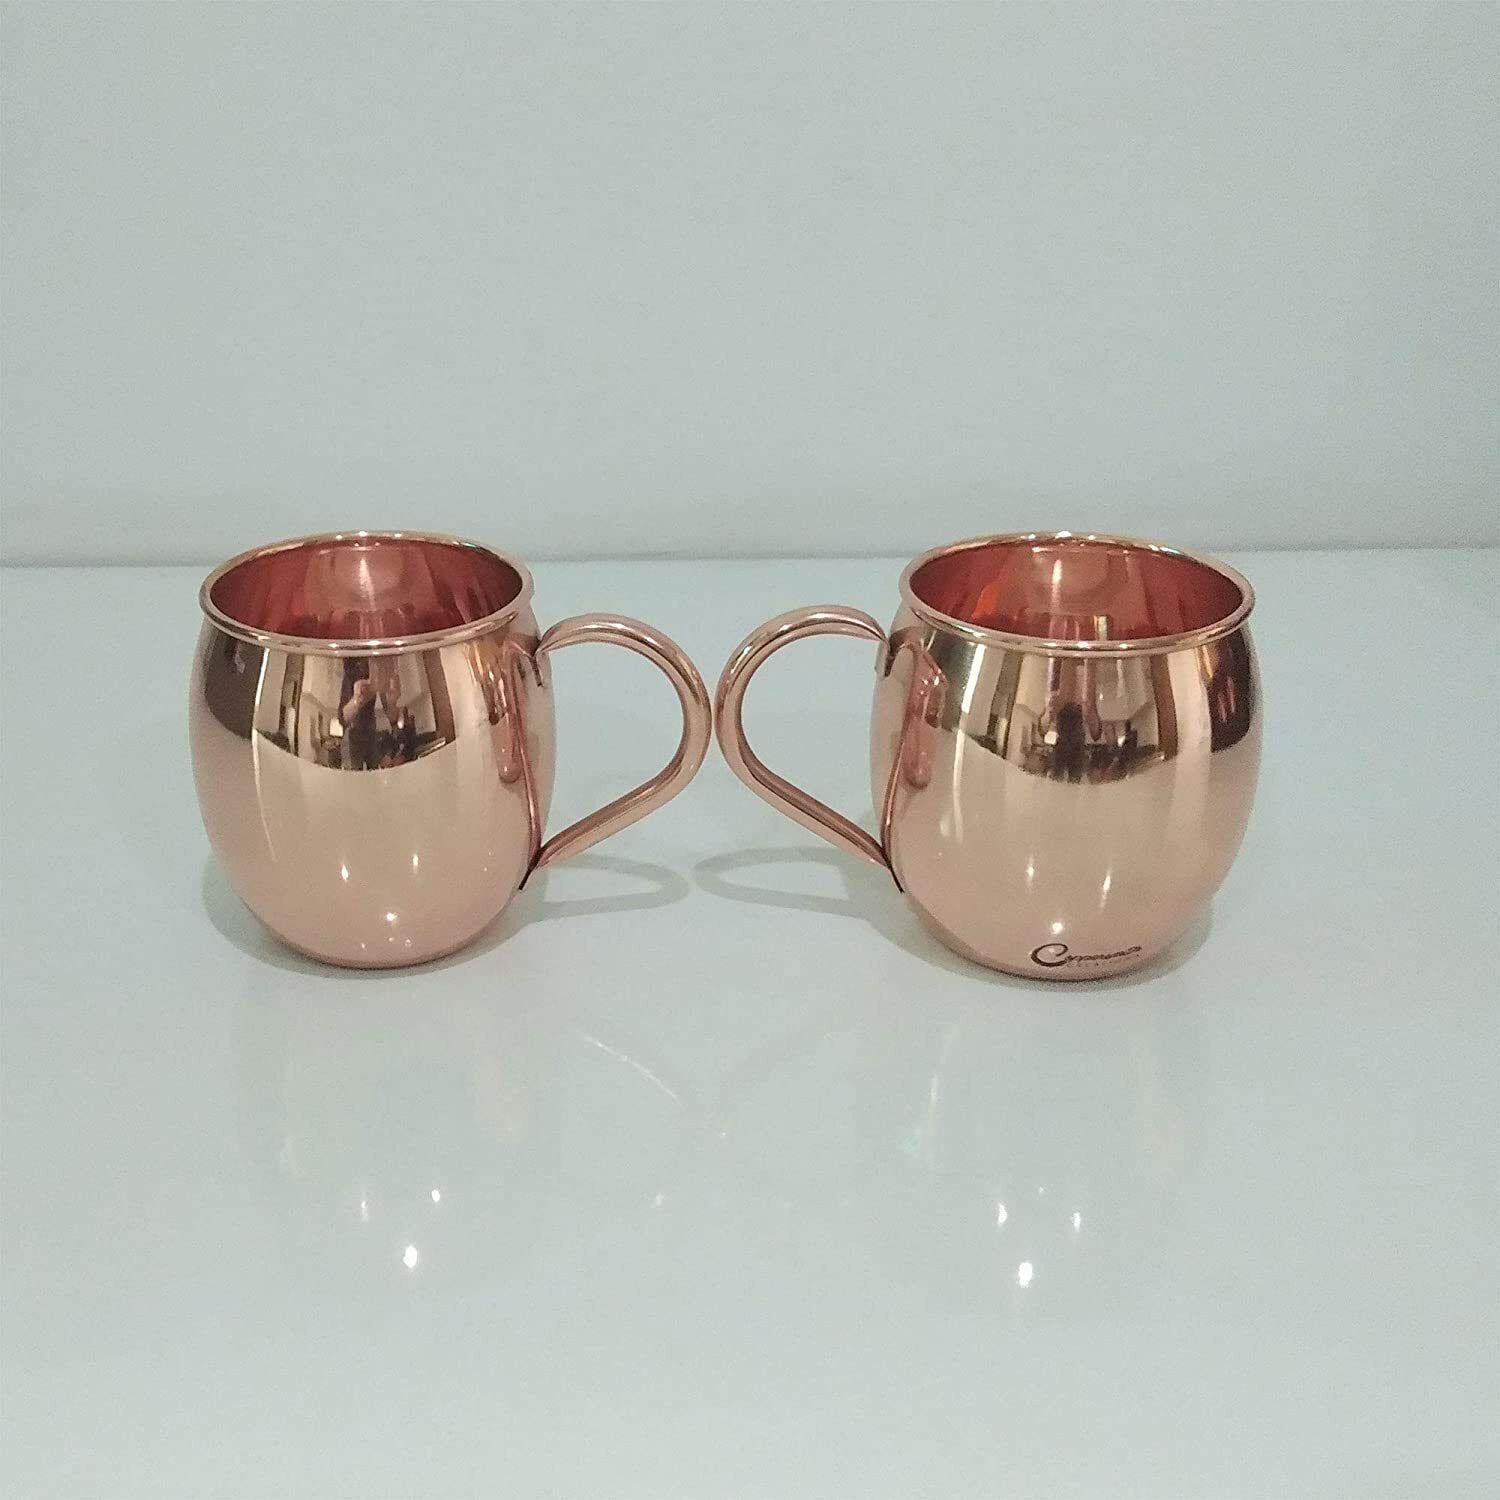 - Copper Mugs For Drinking - Pure Copper Mugs Set Of  2